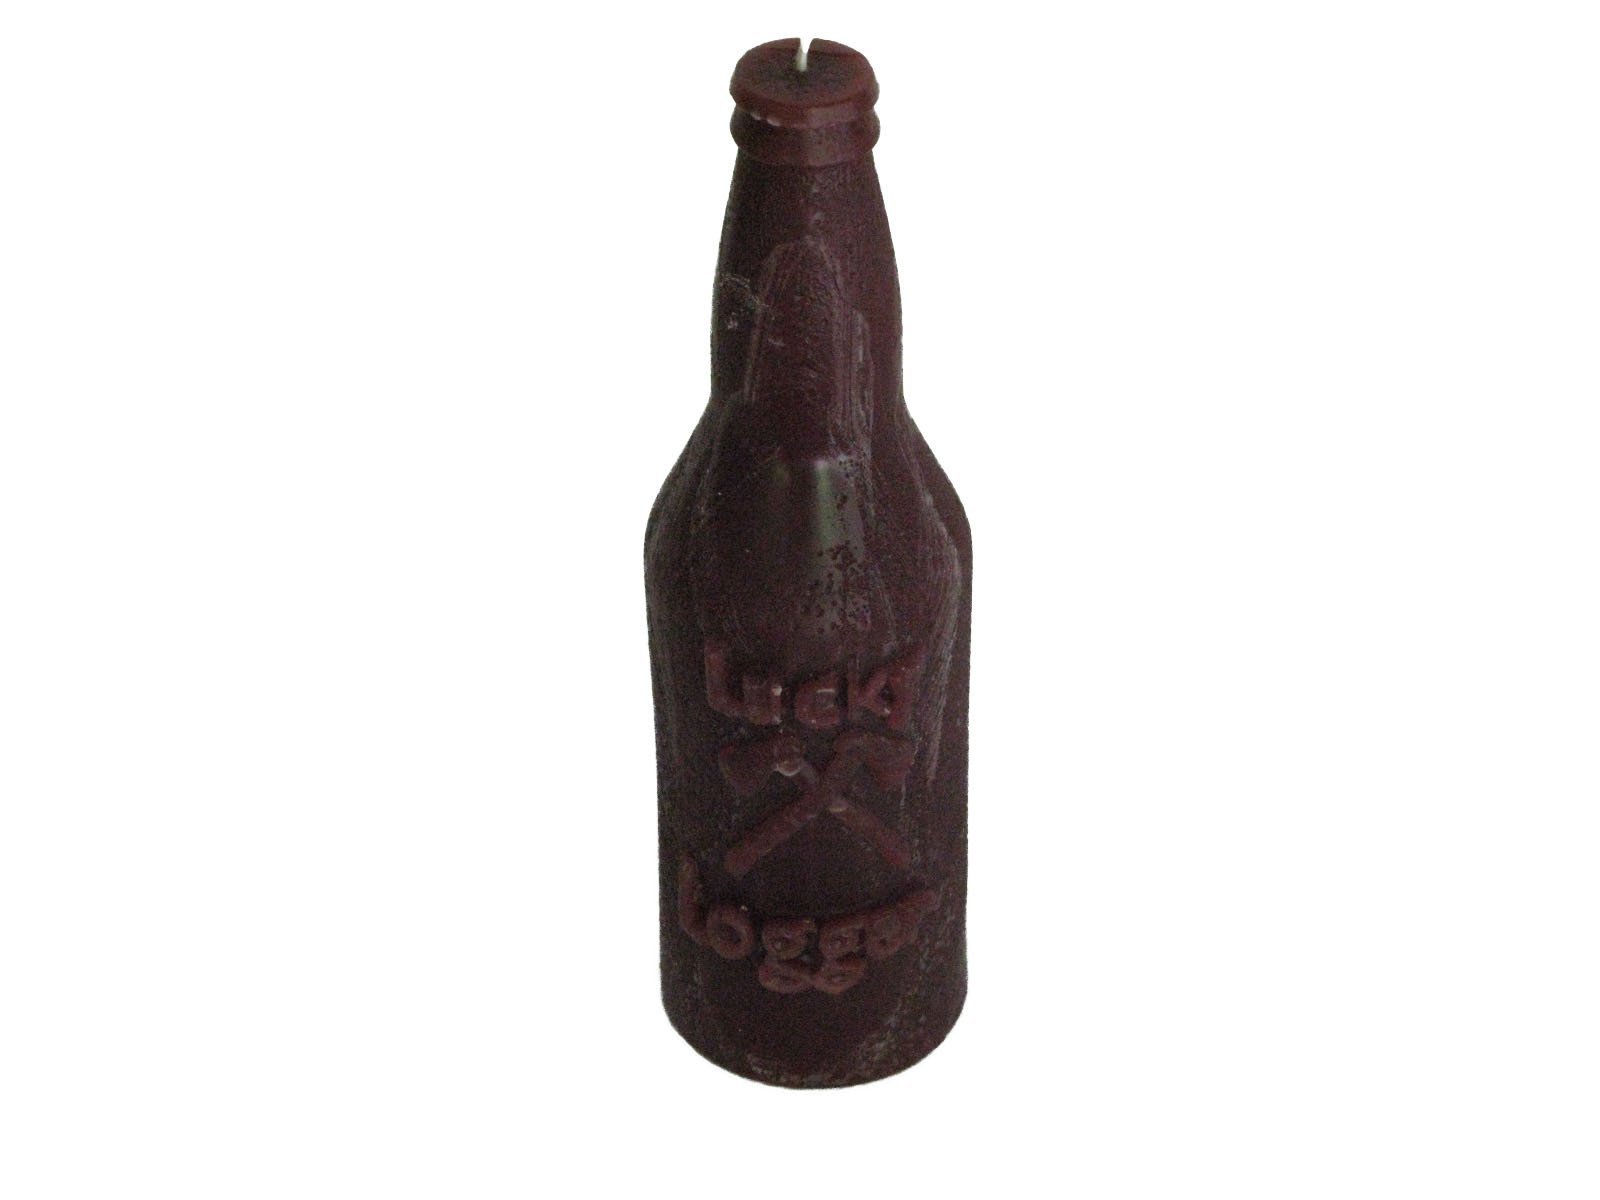 Lucky Logger Beer Bottle, Amber Brown, 2 1/2"D x 8 3/4"H, fragrance free only - Fanny Bay Candle Company